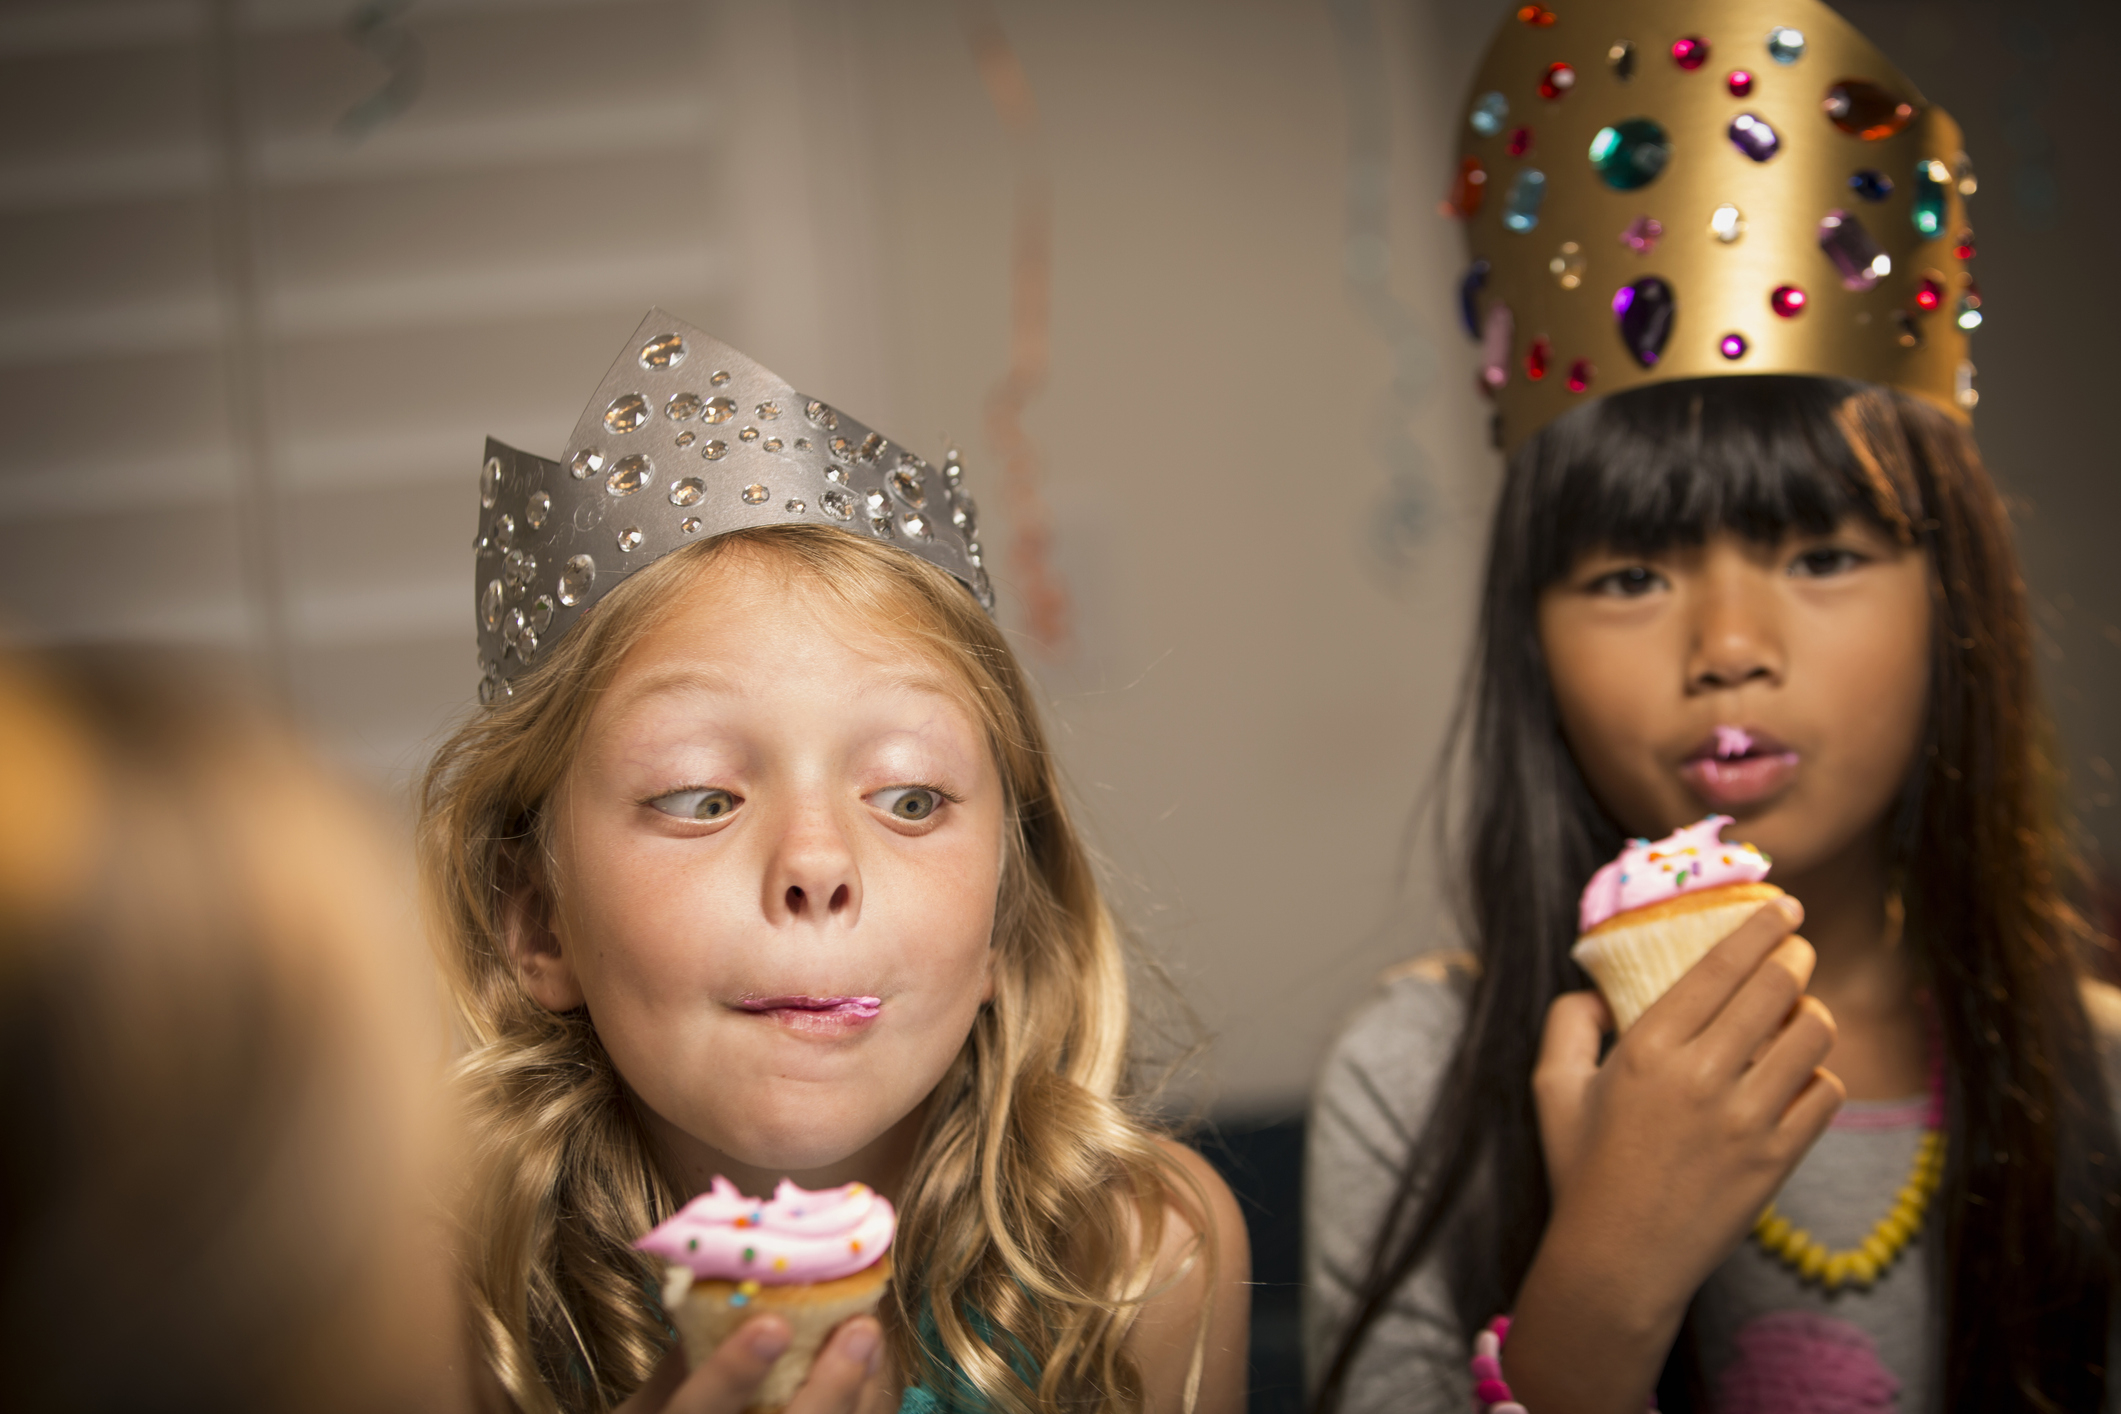 Kids wearing crowns and eating cupcakes